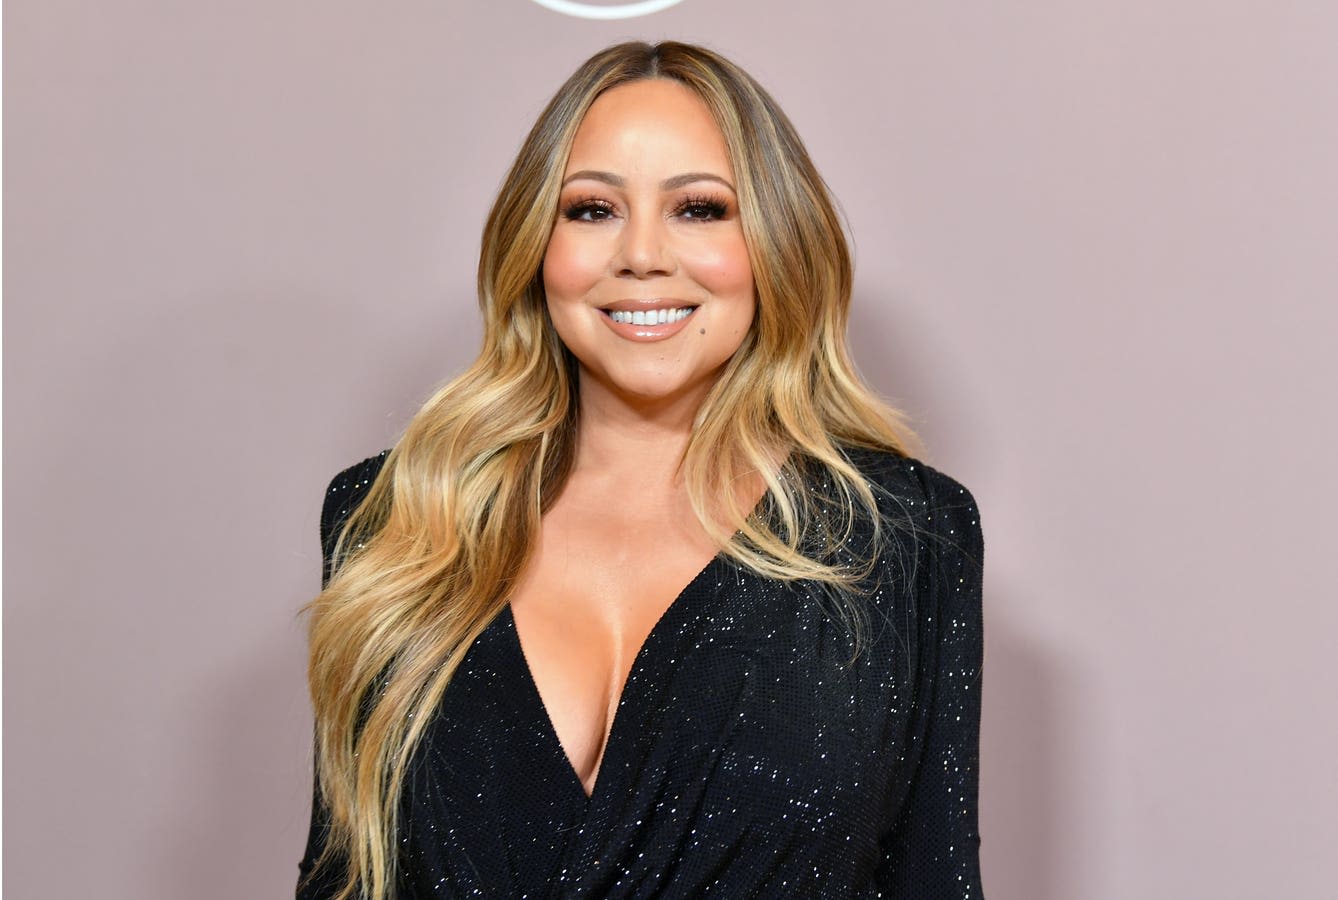 Mariah Carey Surprises With Her First Career Hit On One Billboard Chart